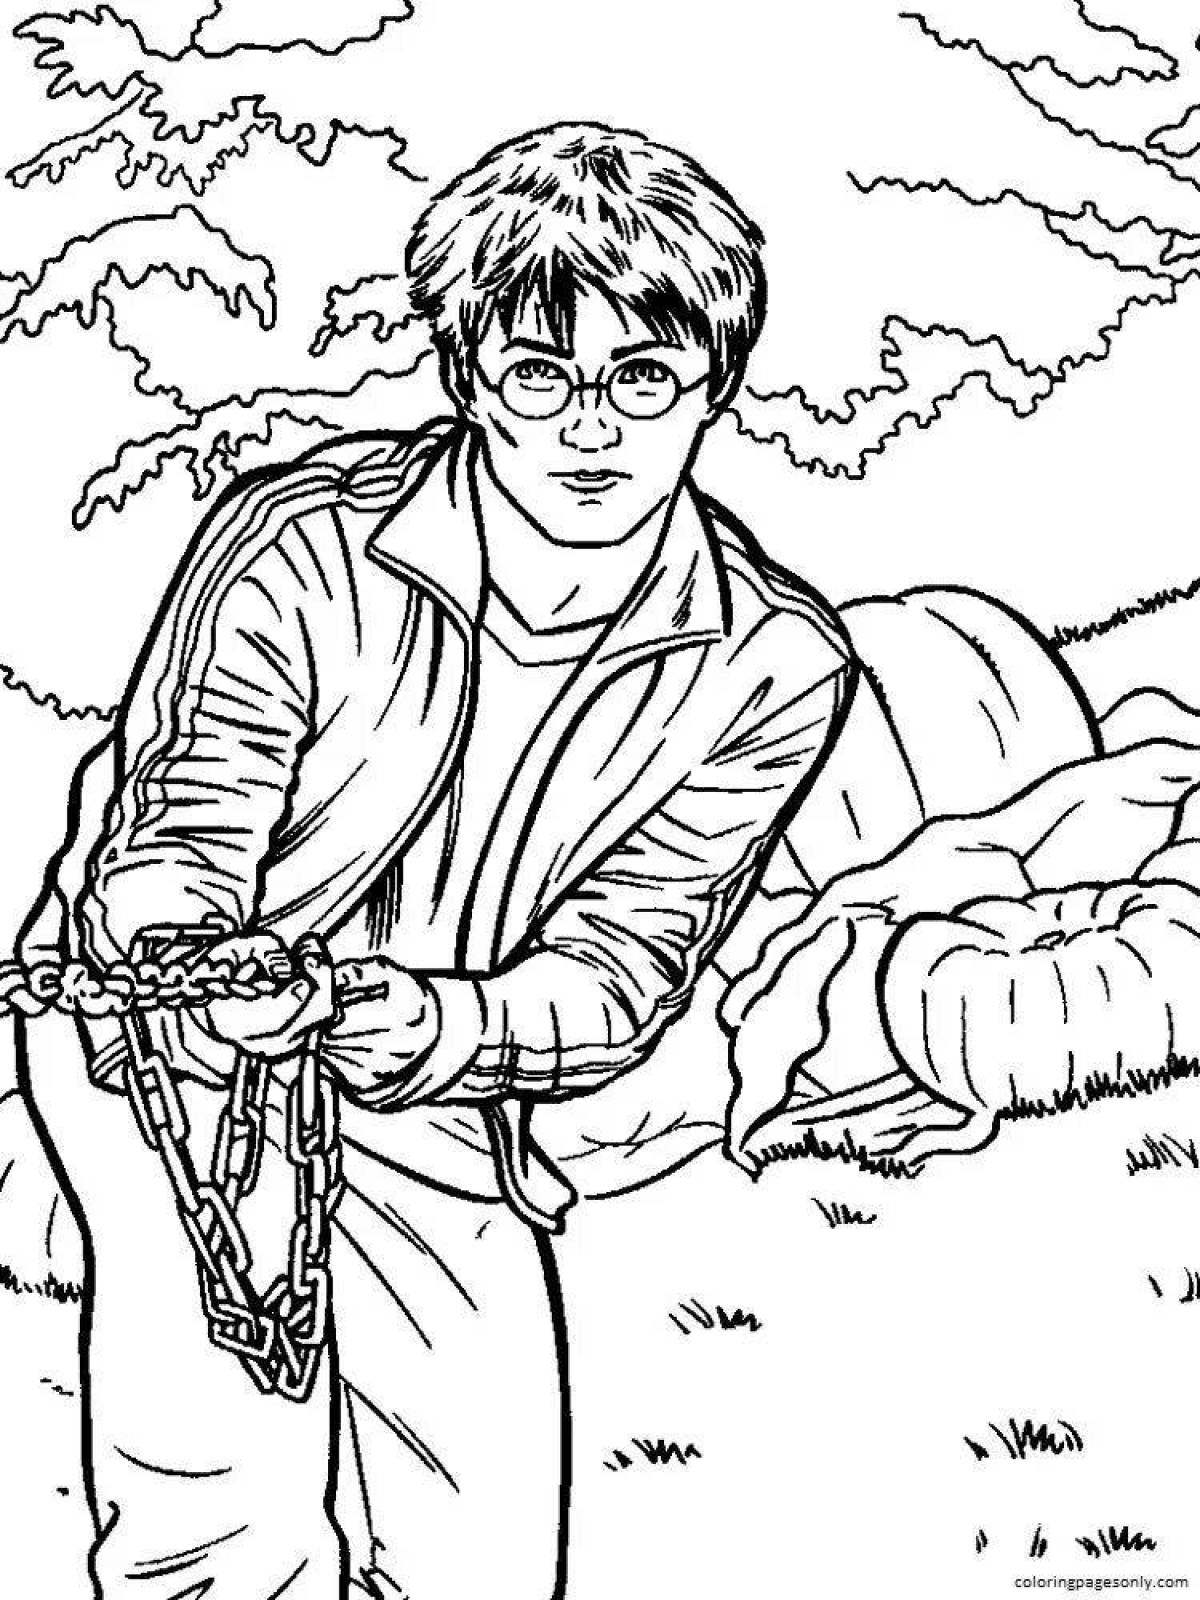 Exquisite harry potter coloring book